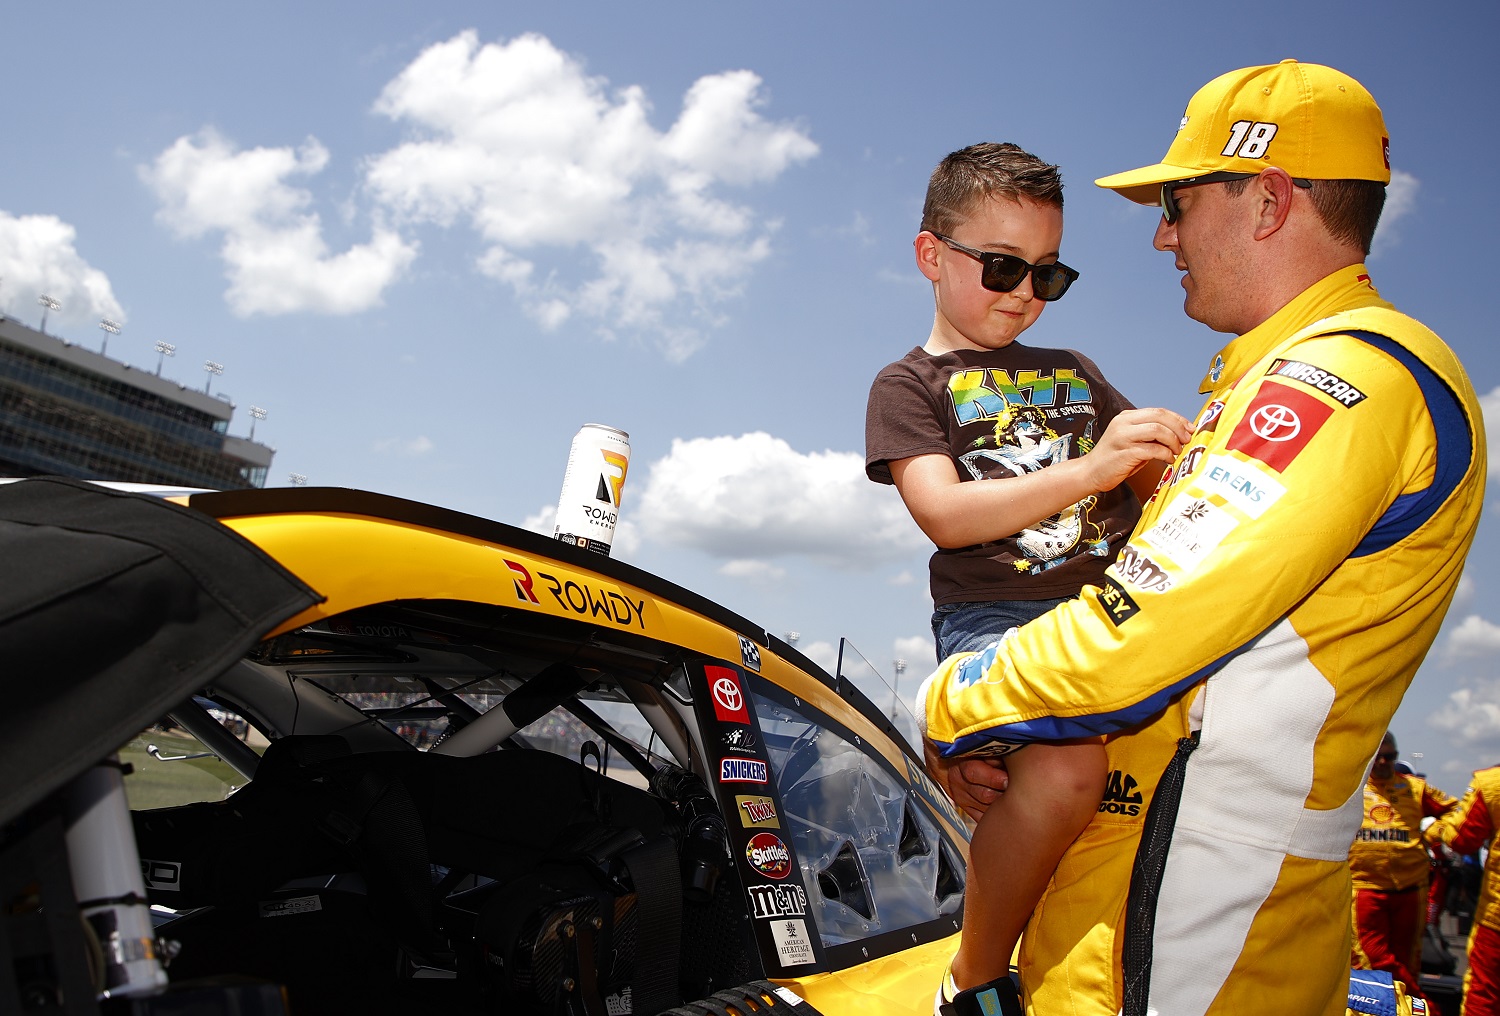 Kyle Busch, driver of the No. 18 Toyota, spends time with son Brexton prior to the NASCAR Cup Series Ally 400 at Nashville Superspeedway on June 20, 2021. |  Jared C. Tilton/Getty Images